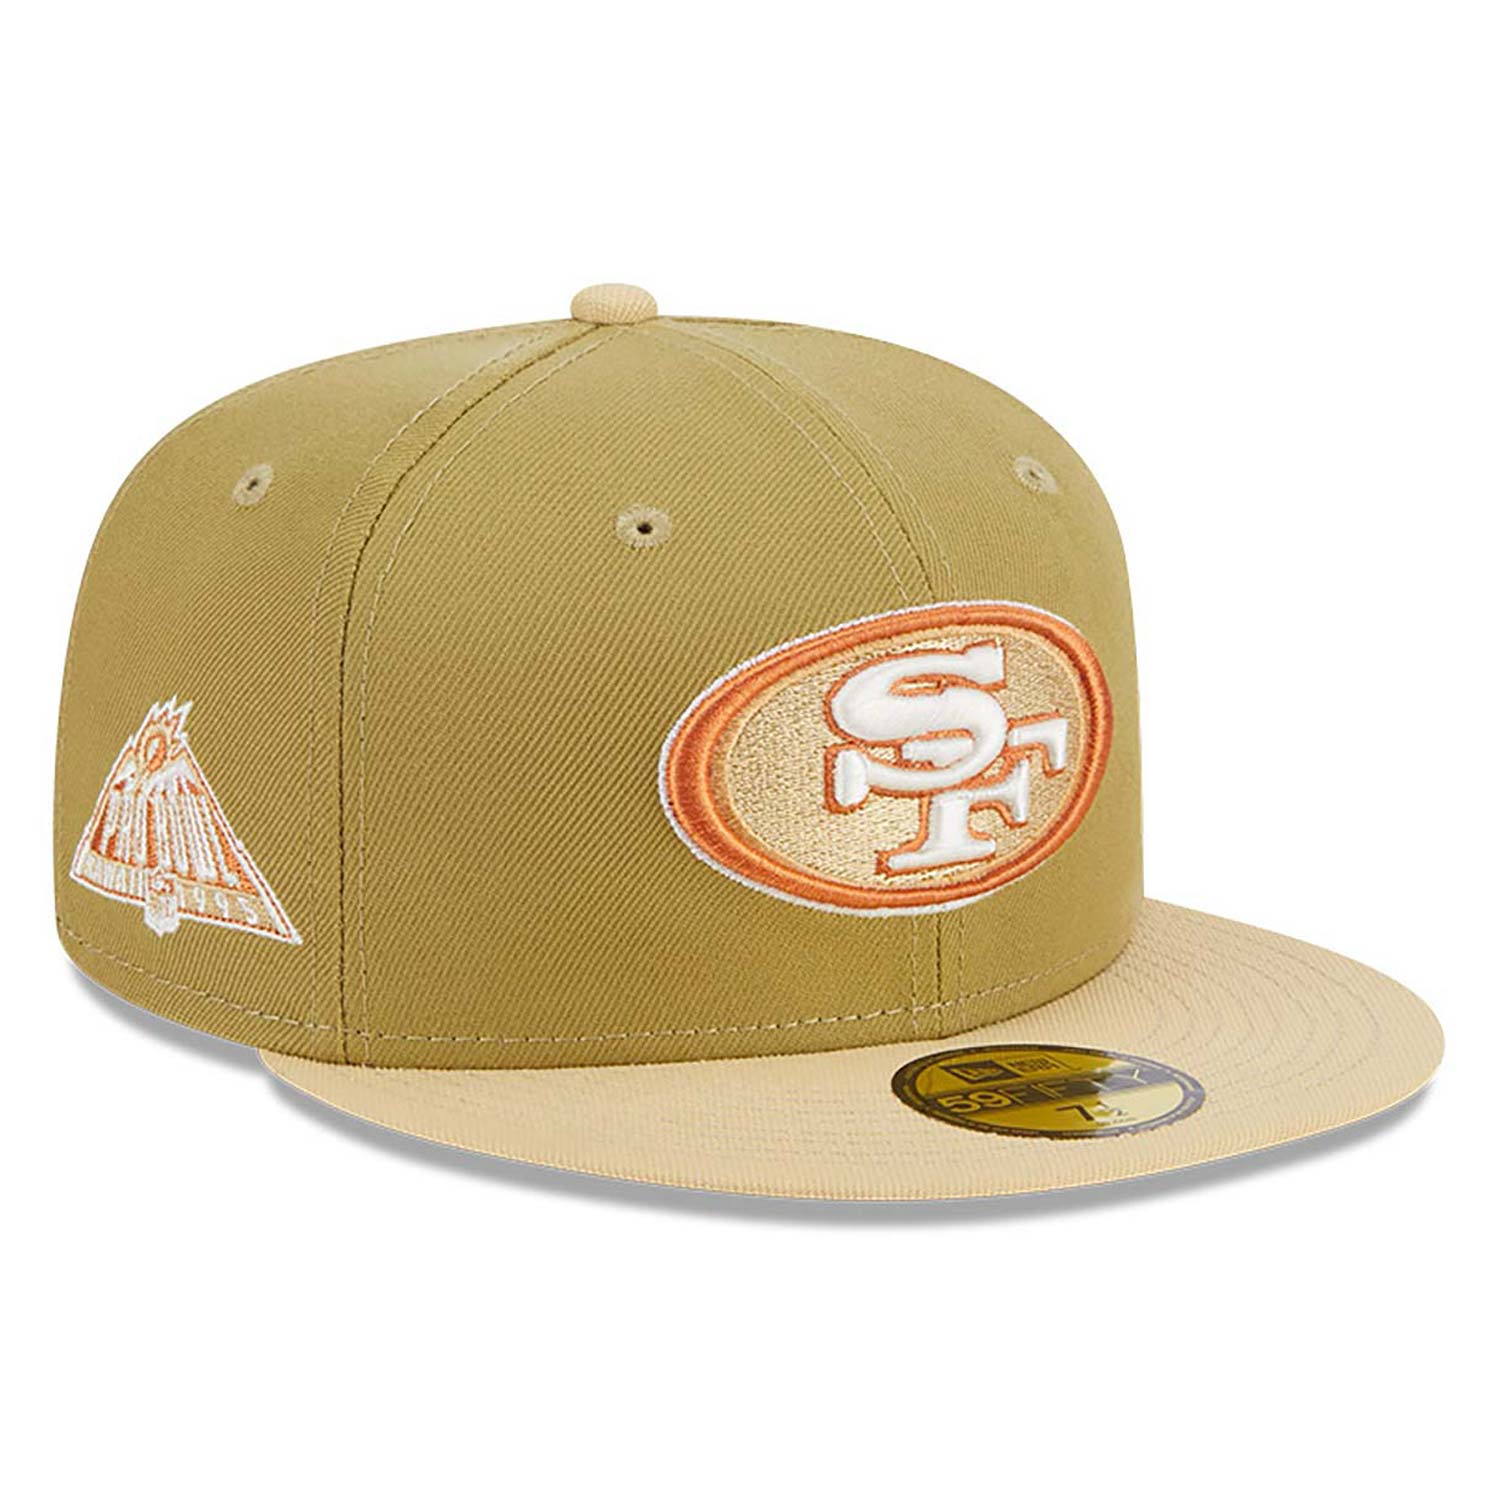 49ers 59fifty hat